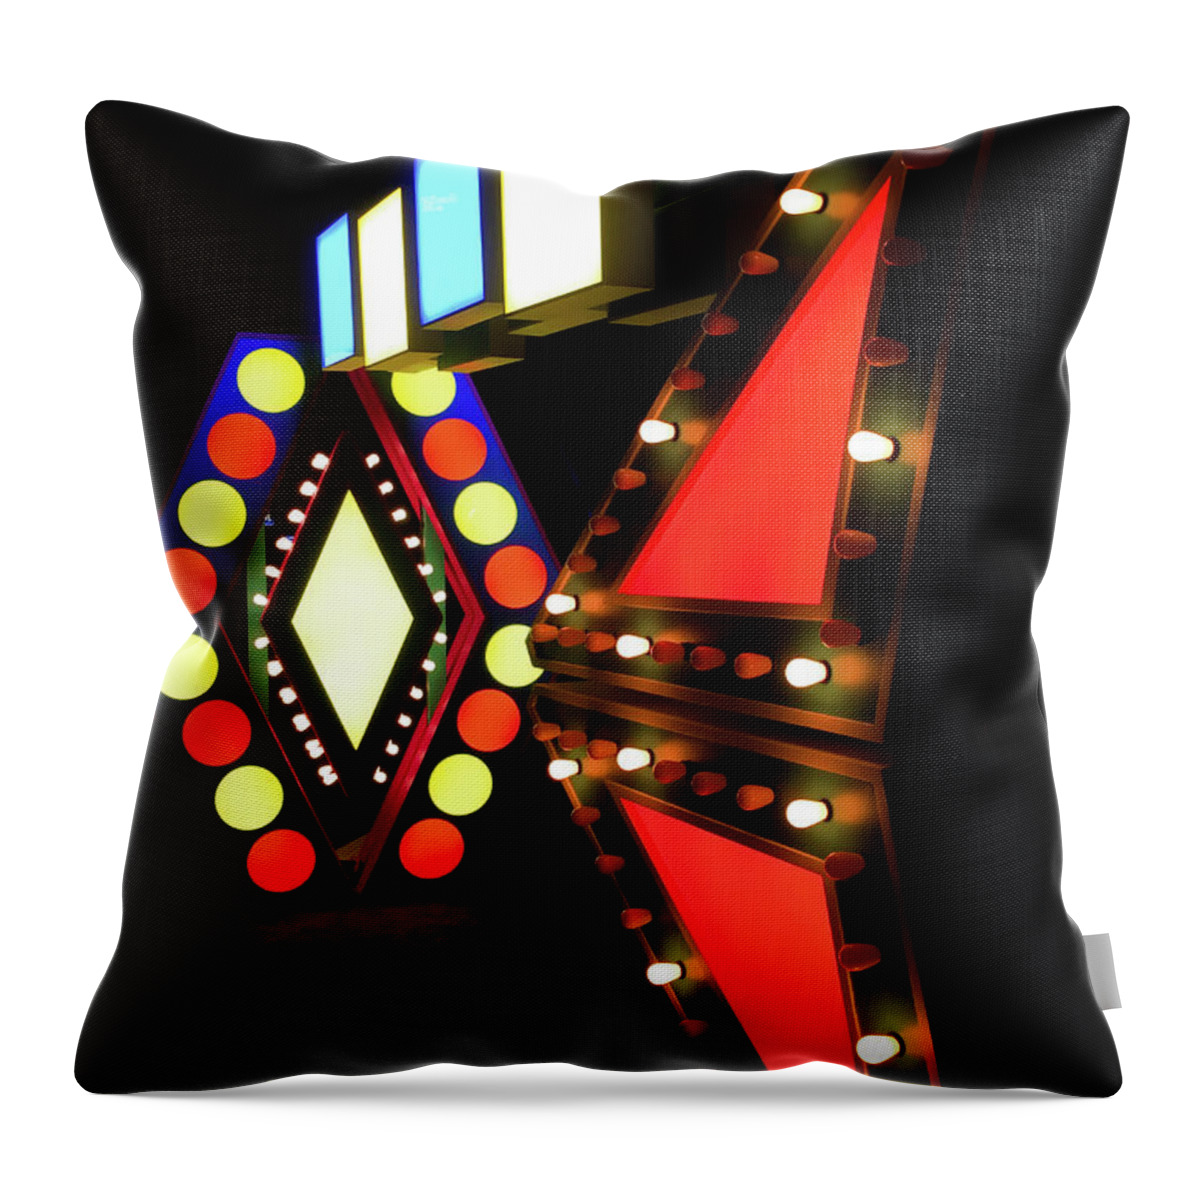 #lightcitybaltimore Throw Pillow featuring the photograph Illuminated Designs #1 by Mark Dodd